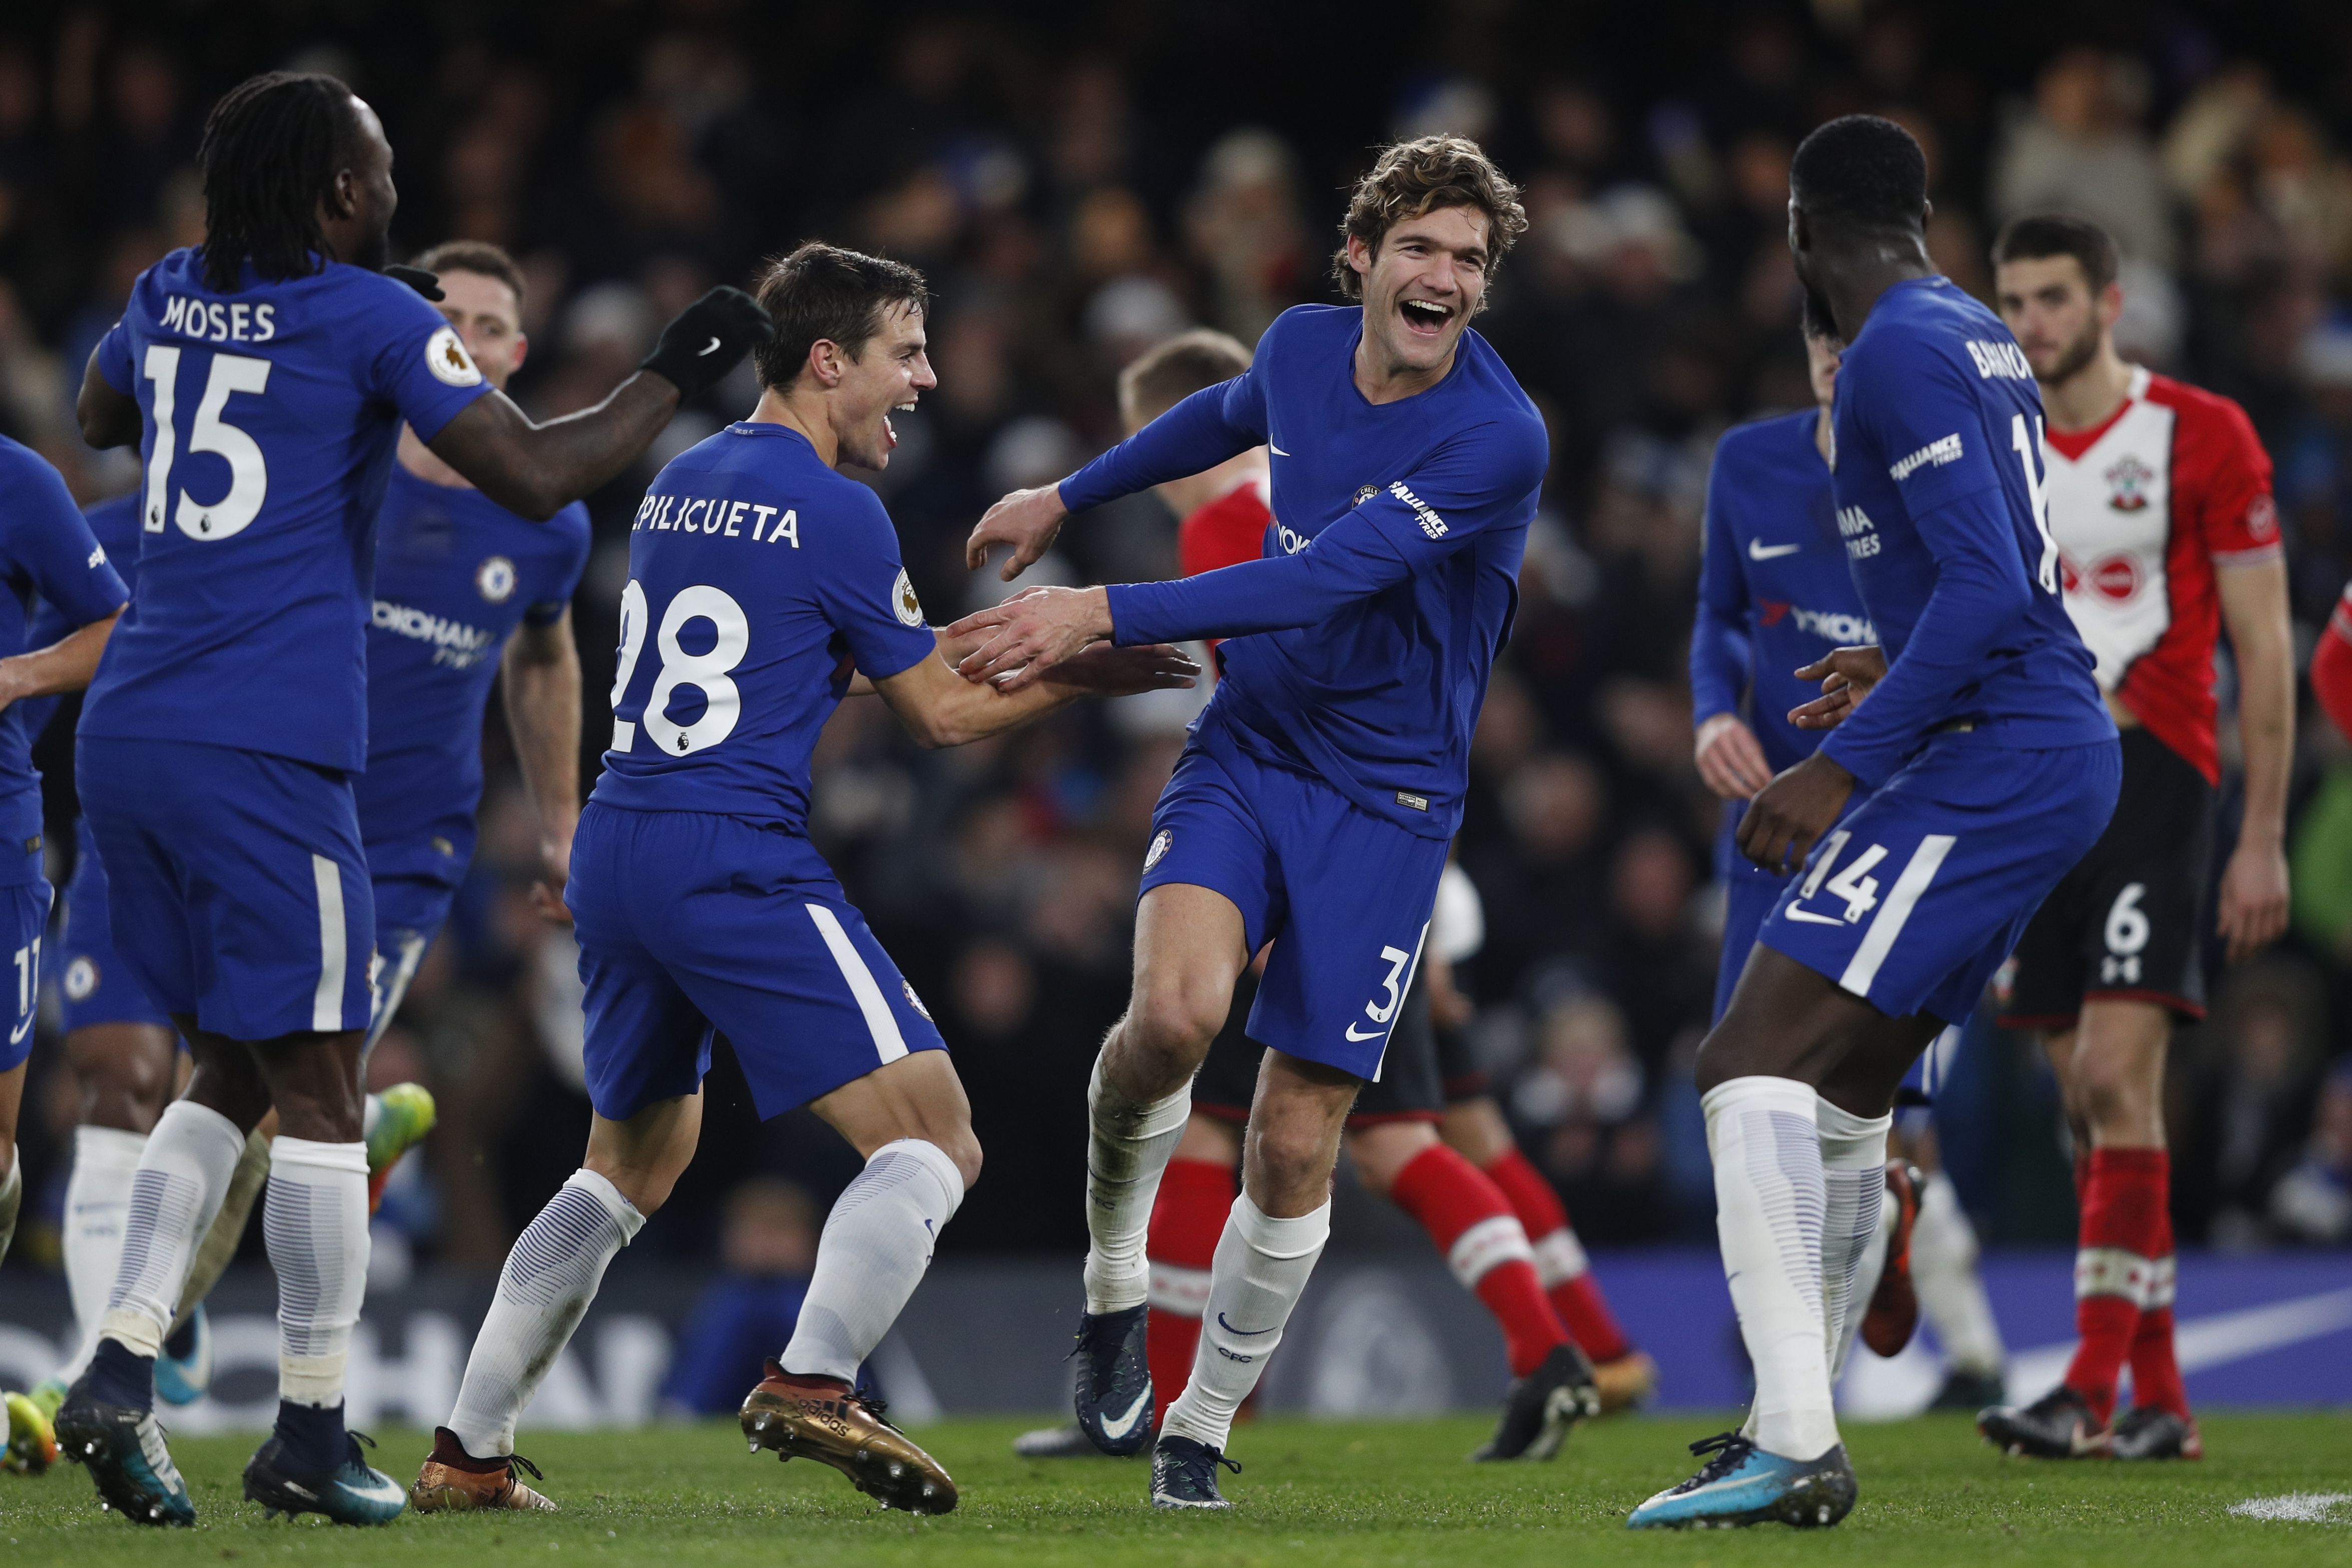 Chelsea's Spanish defender Marcos Alonso (C) celebrates after scoring with Chelsea's French midfielder Tiemoue Bakayoko (R) and Chelsea's Spanish defender Cesar Azpilicueta during the English Premier League football match between Chelsea and Southampton at Stamford Bridge in London on December 16, 2017. / AFP PHOTO / Adrian DENNIS / RESTRICTED TO EDITORIAL USE. No use with unauthorized audio, video, data, fixture lists, club/league logos or 'live' services. Online in-match use limited to 75 images, no video emulation. No use in betting, games or single club/league/player publications.  /         (Photo credit should read ADRIAN DENNIS/AFP/Getty Images)